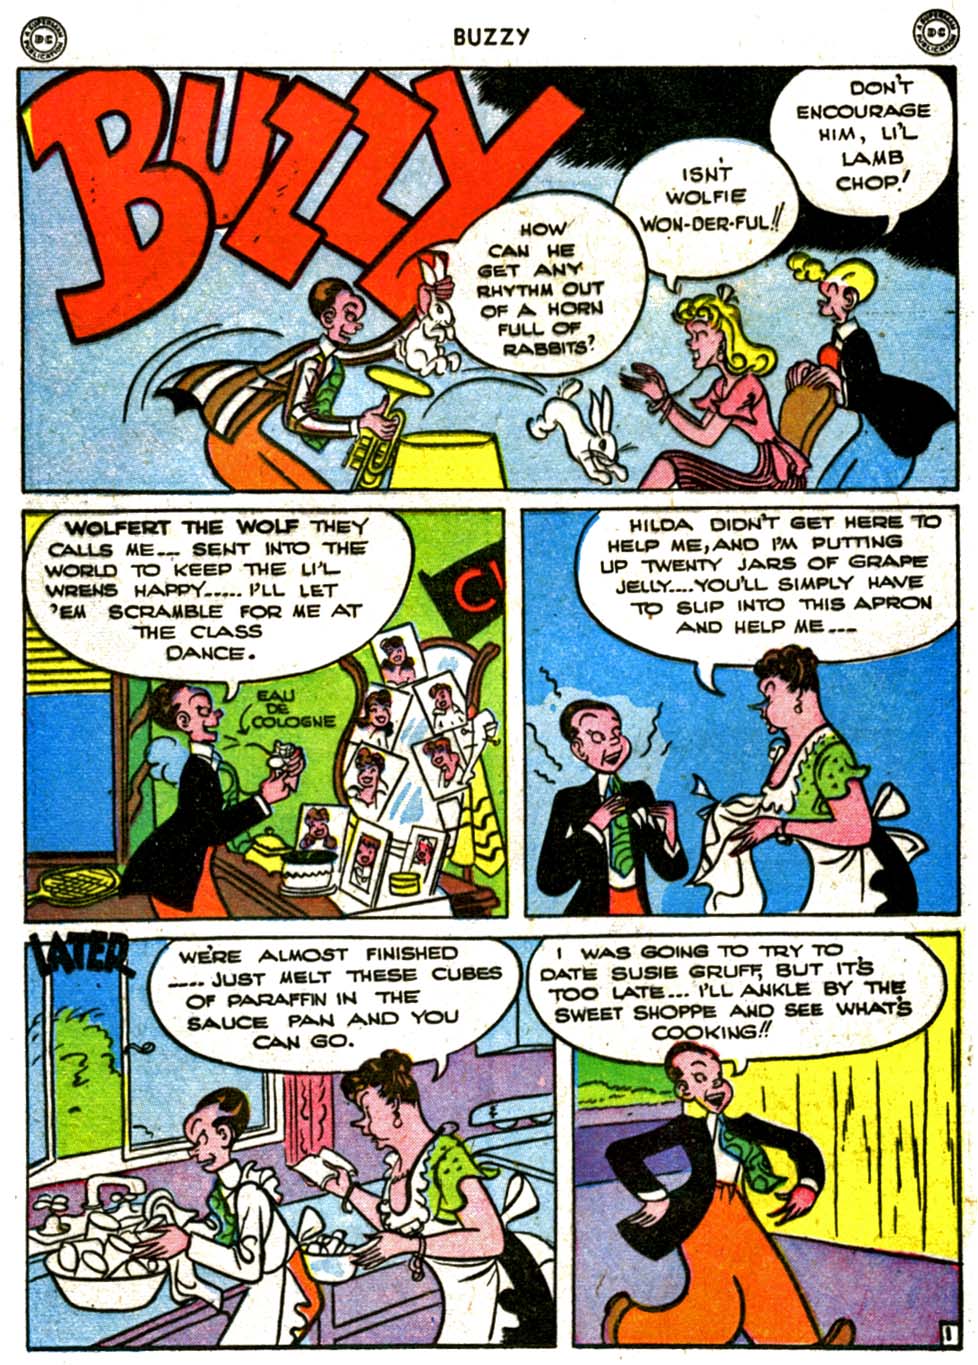 Read online Buzzy comic -  Issue #13 - 23